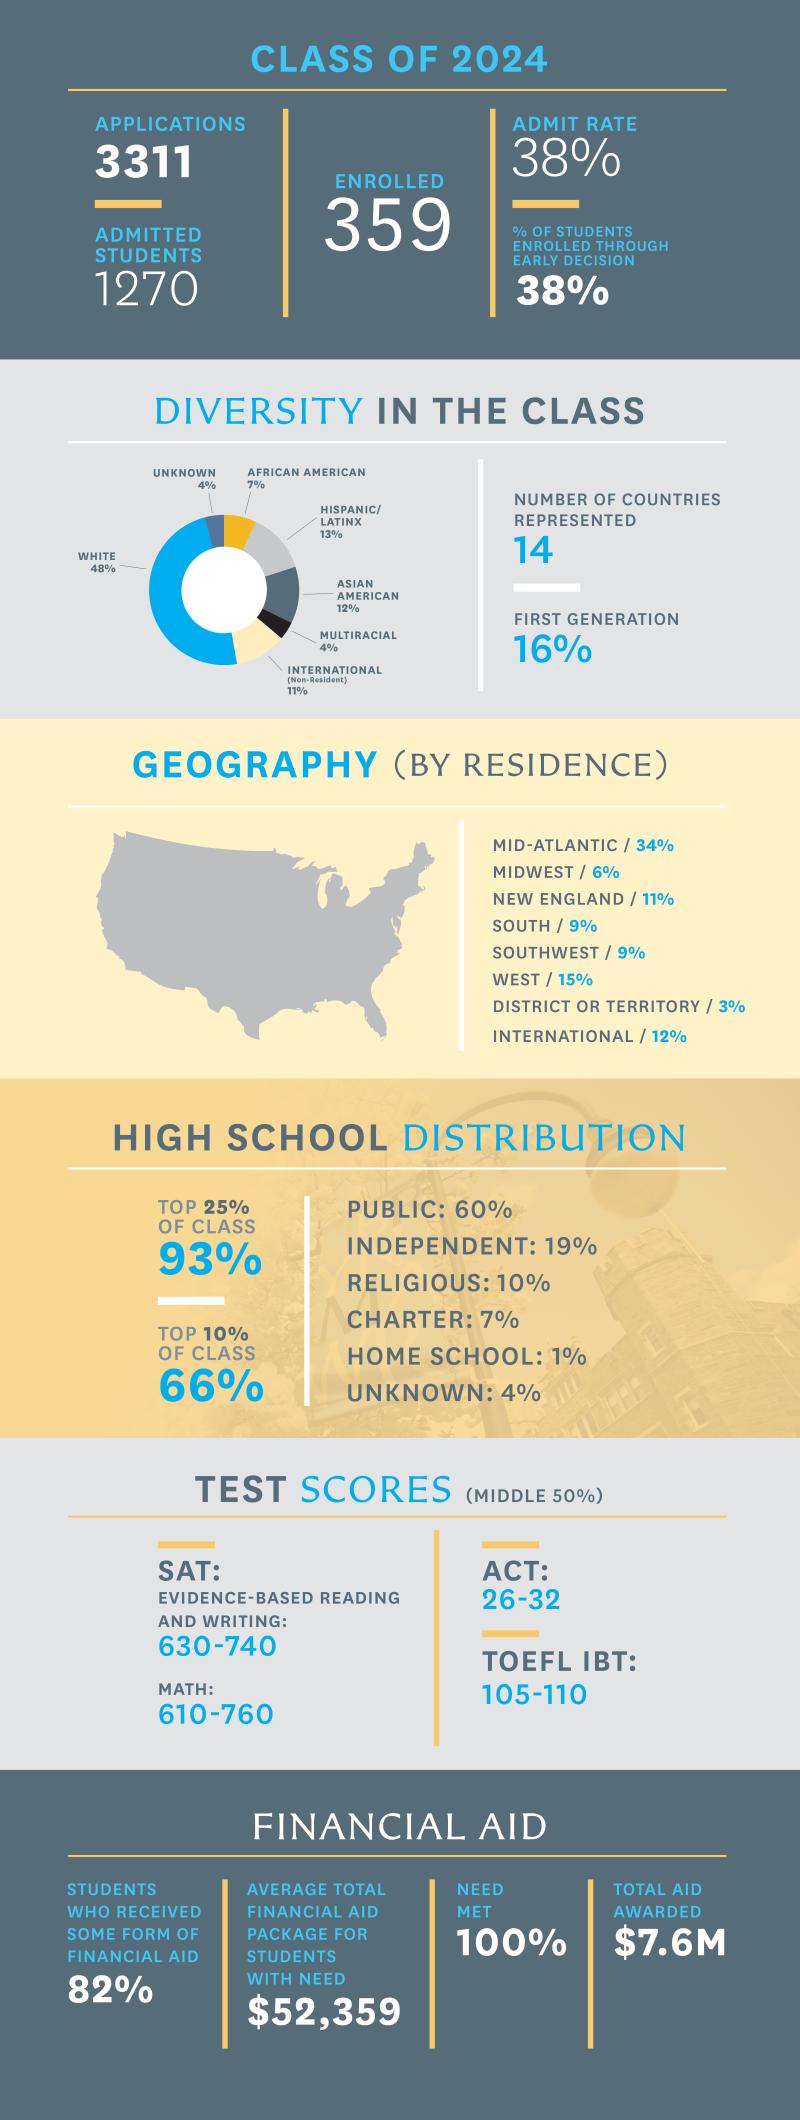 Class of 2024 Infographic